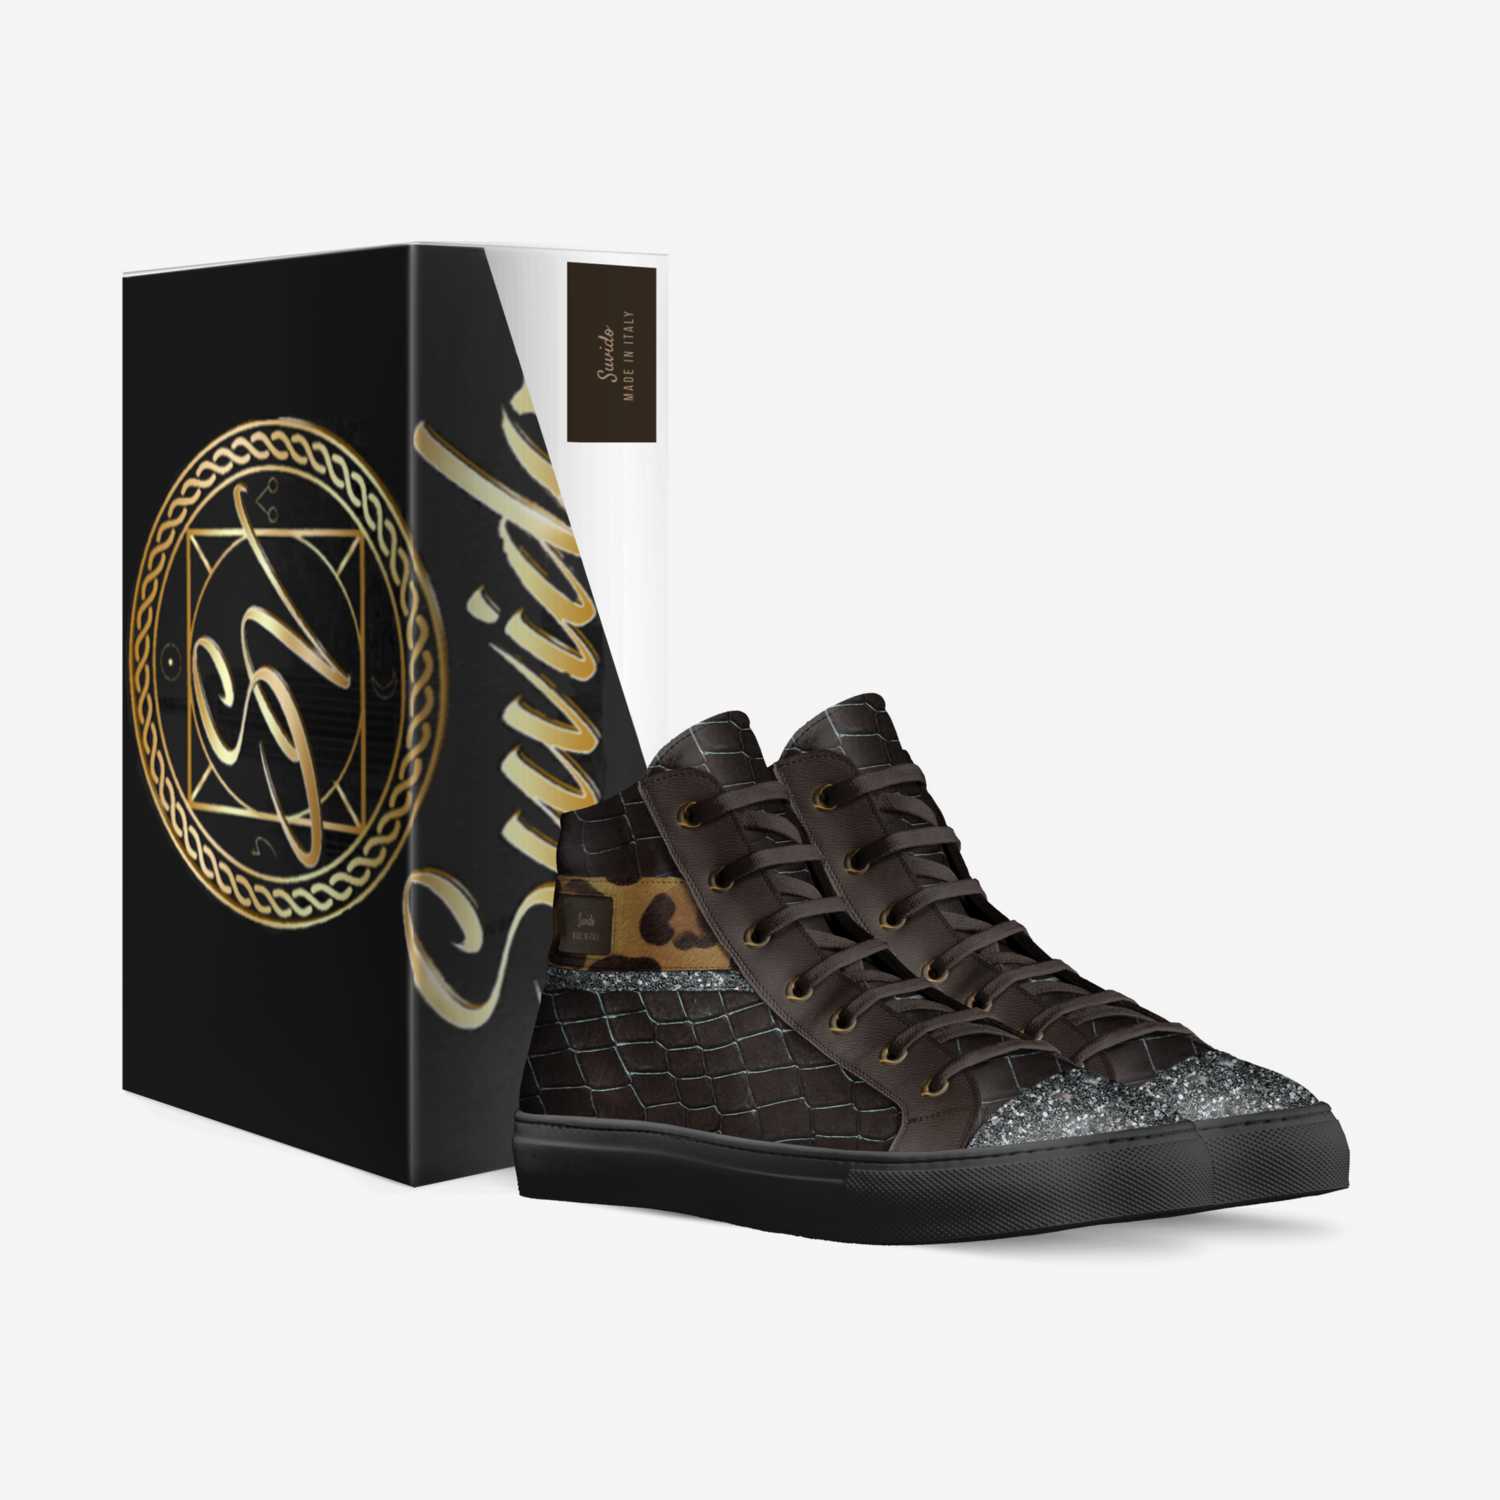 Suvido custom made in Italy shoes by Julian Bennett | Box view